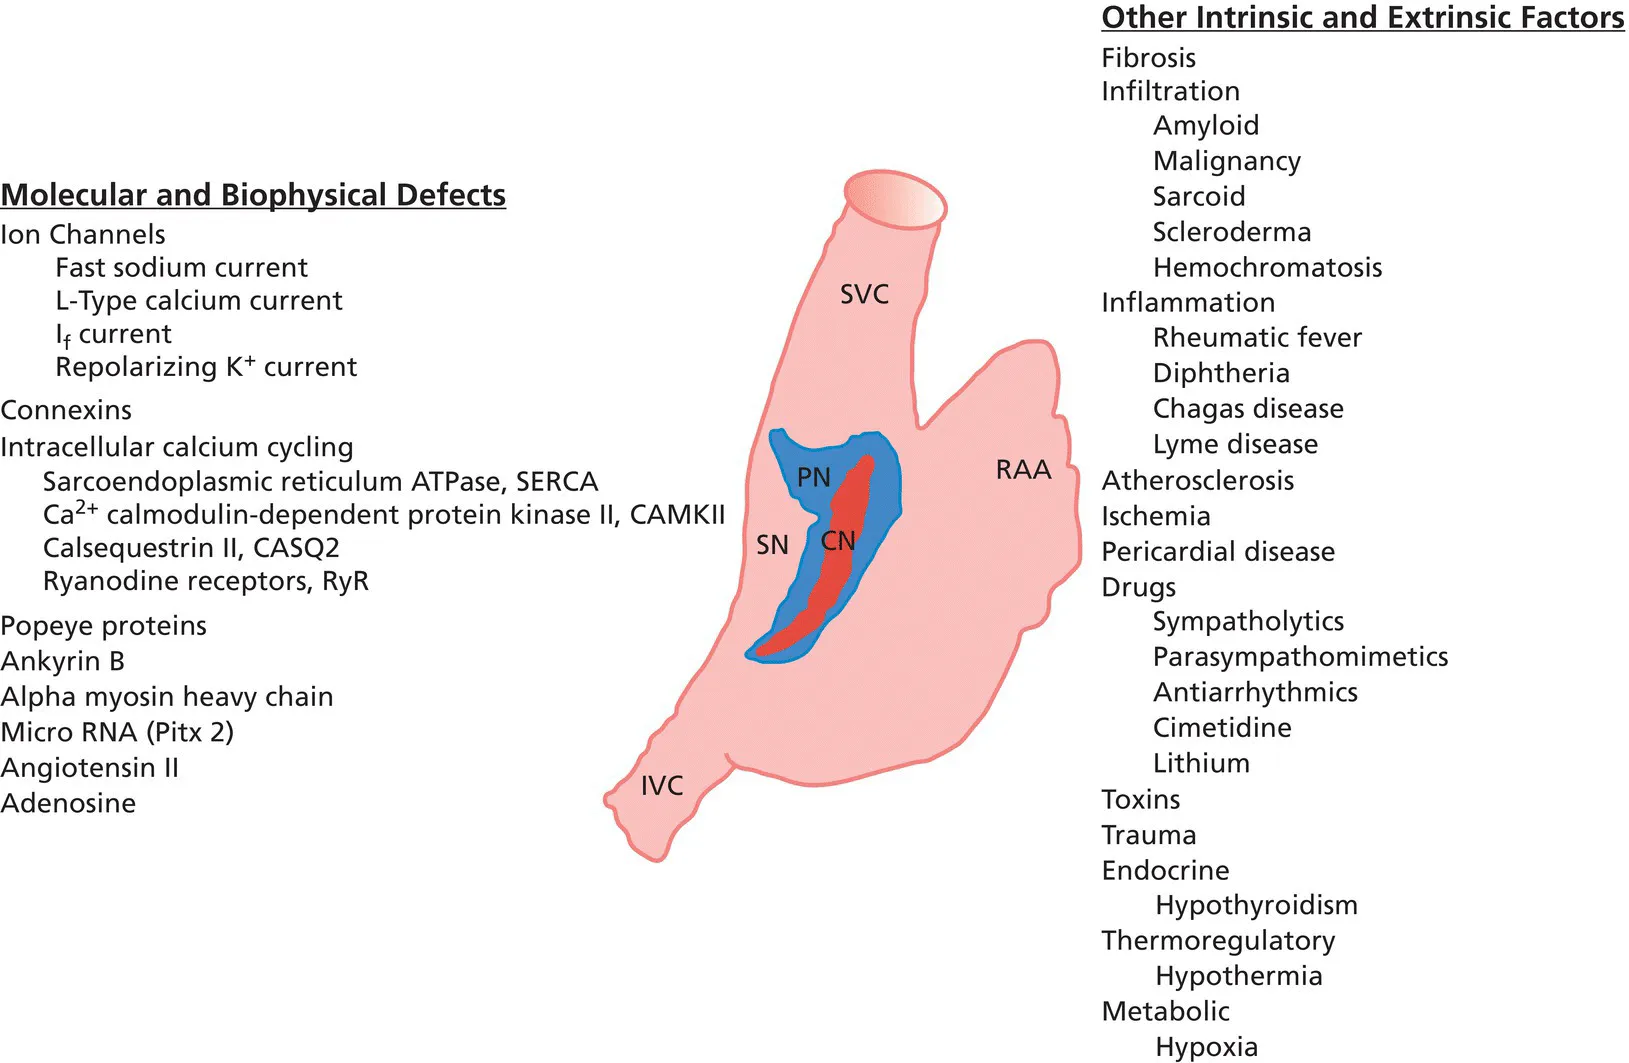 Diagram of the right atrium of the heart displaying the central node, sinus node, etc. The molecular and biophysical defects are listed at the left, while the other intrinsic and extrinsic factors are listed at the right.